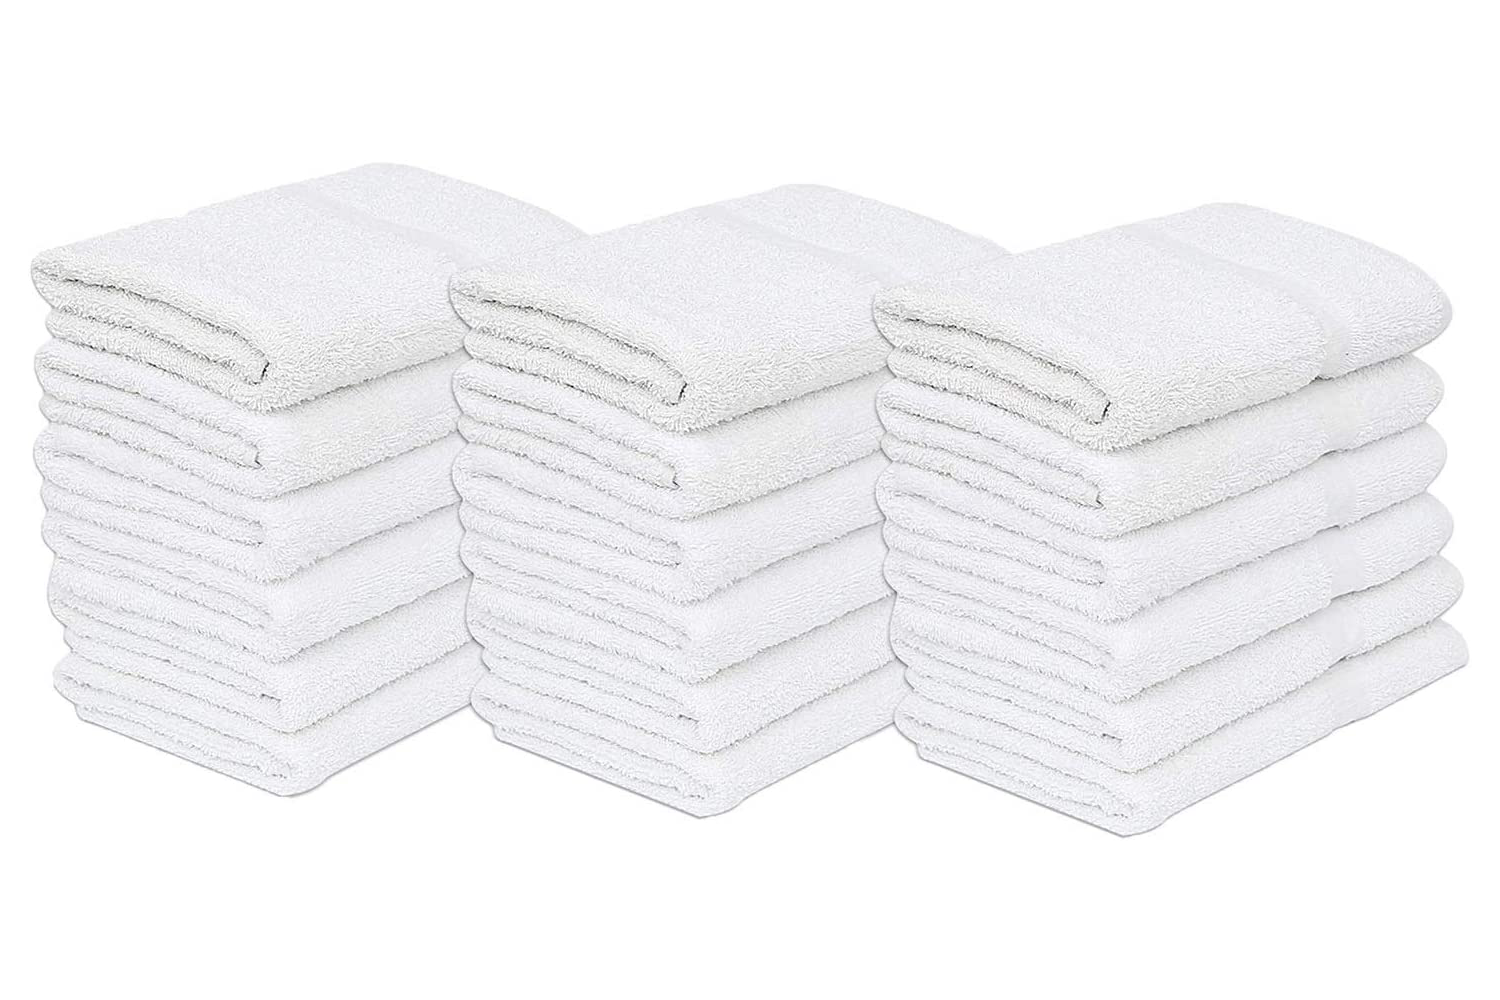 12 Pack Economy 100% Cotton Bath towels 24X48 White for Hotel/Motel, L –  Towels N More